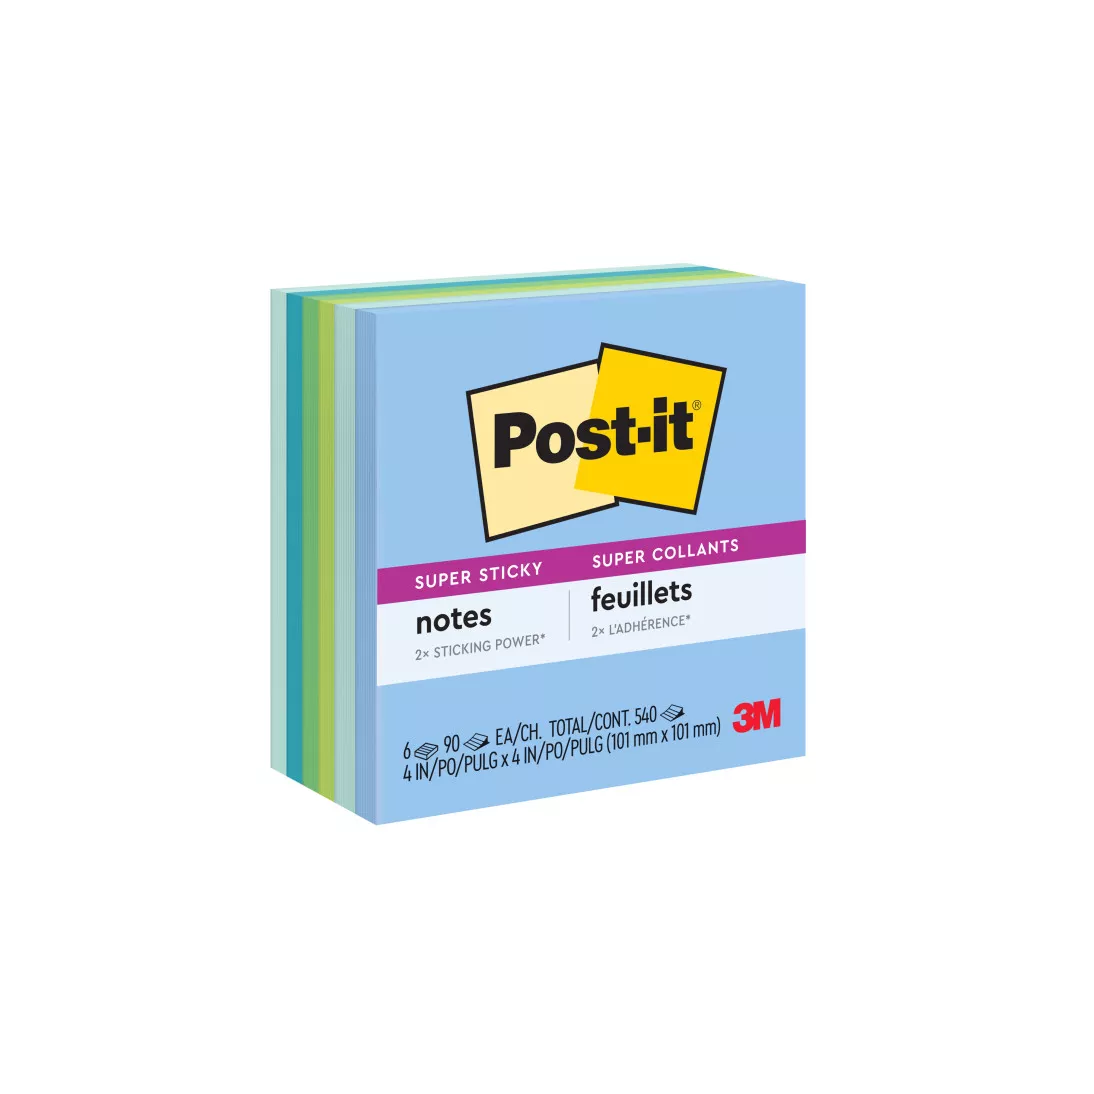 Post-it® Super Sticky Recycled Notes 654-6SST, 3 in x 3 in (76 mm x 76
mm) Bora Bora Collection